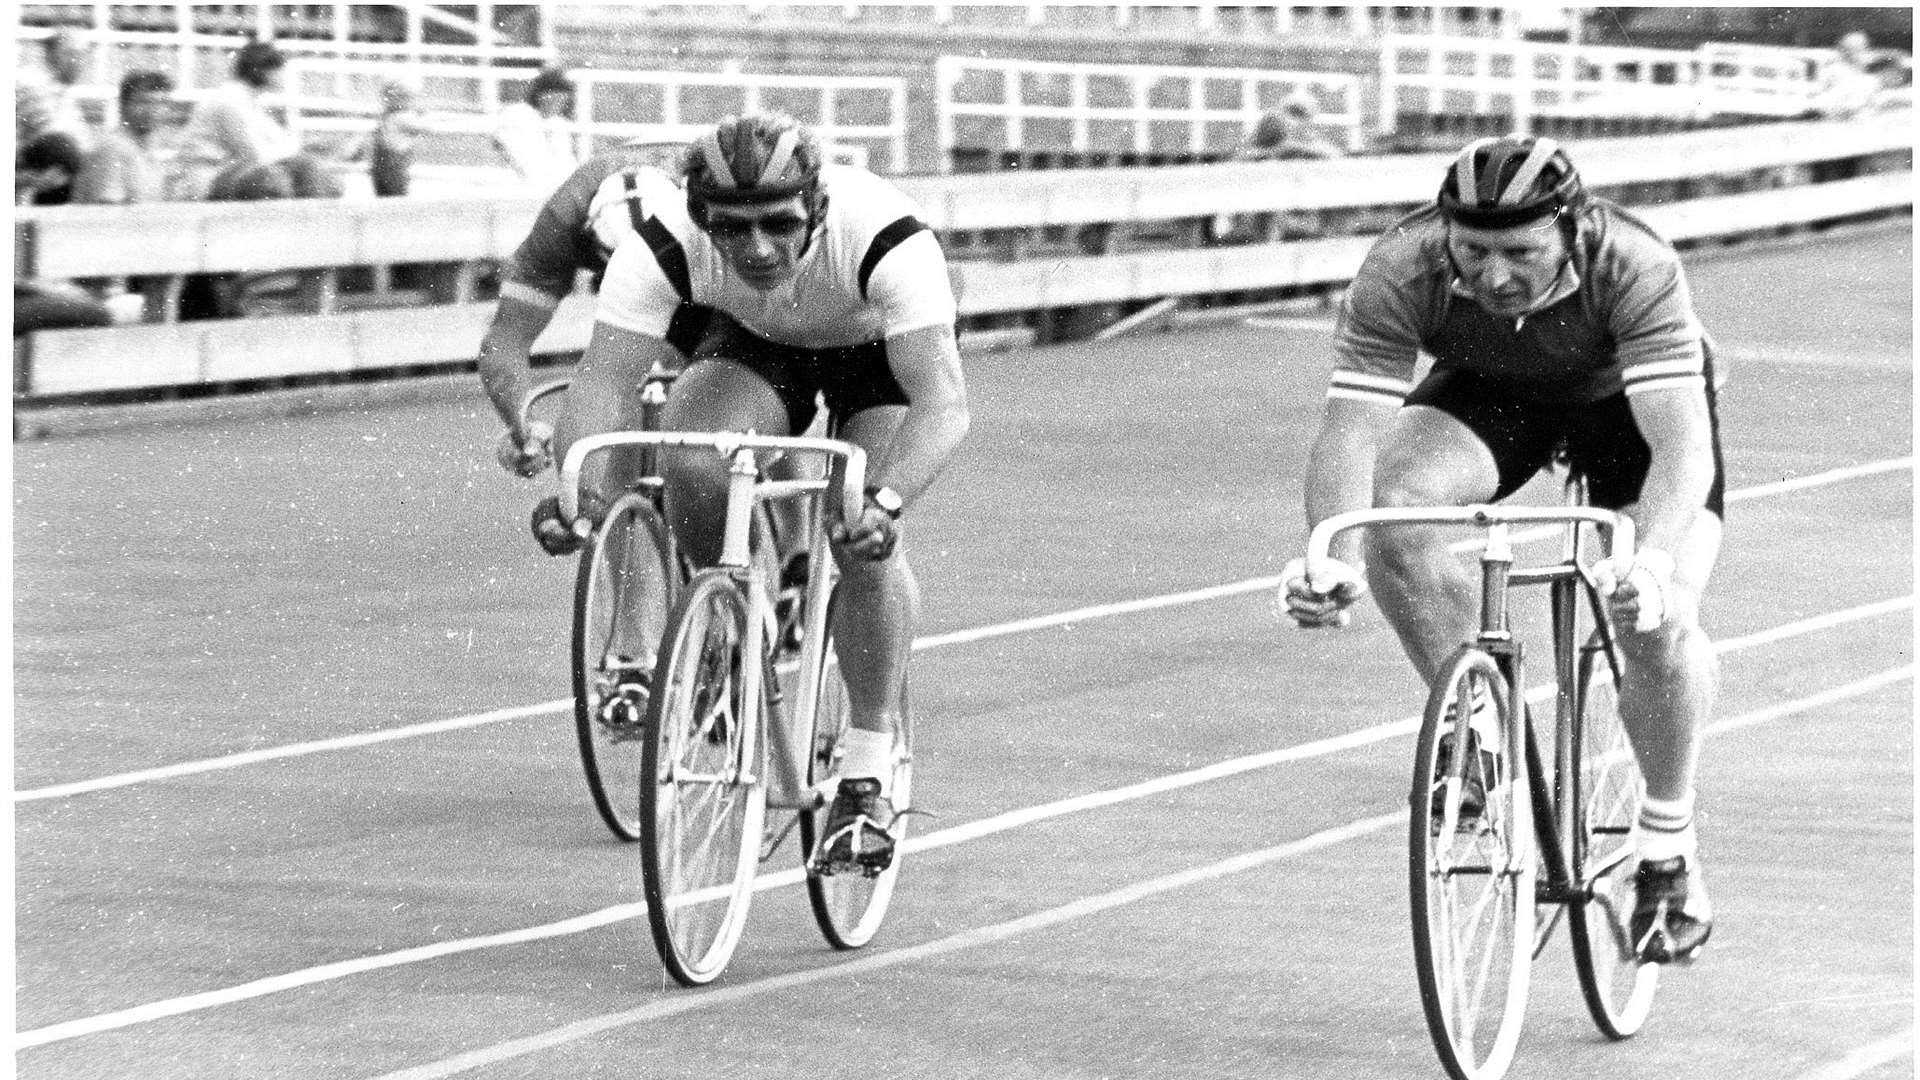 Roy Manser (right) leading the field